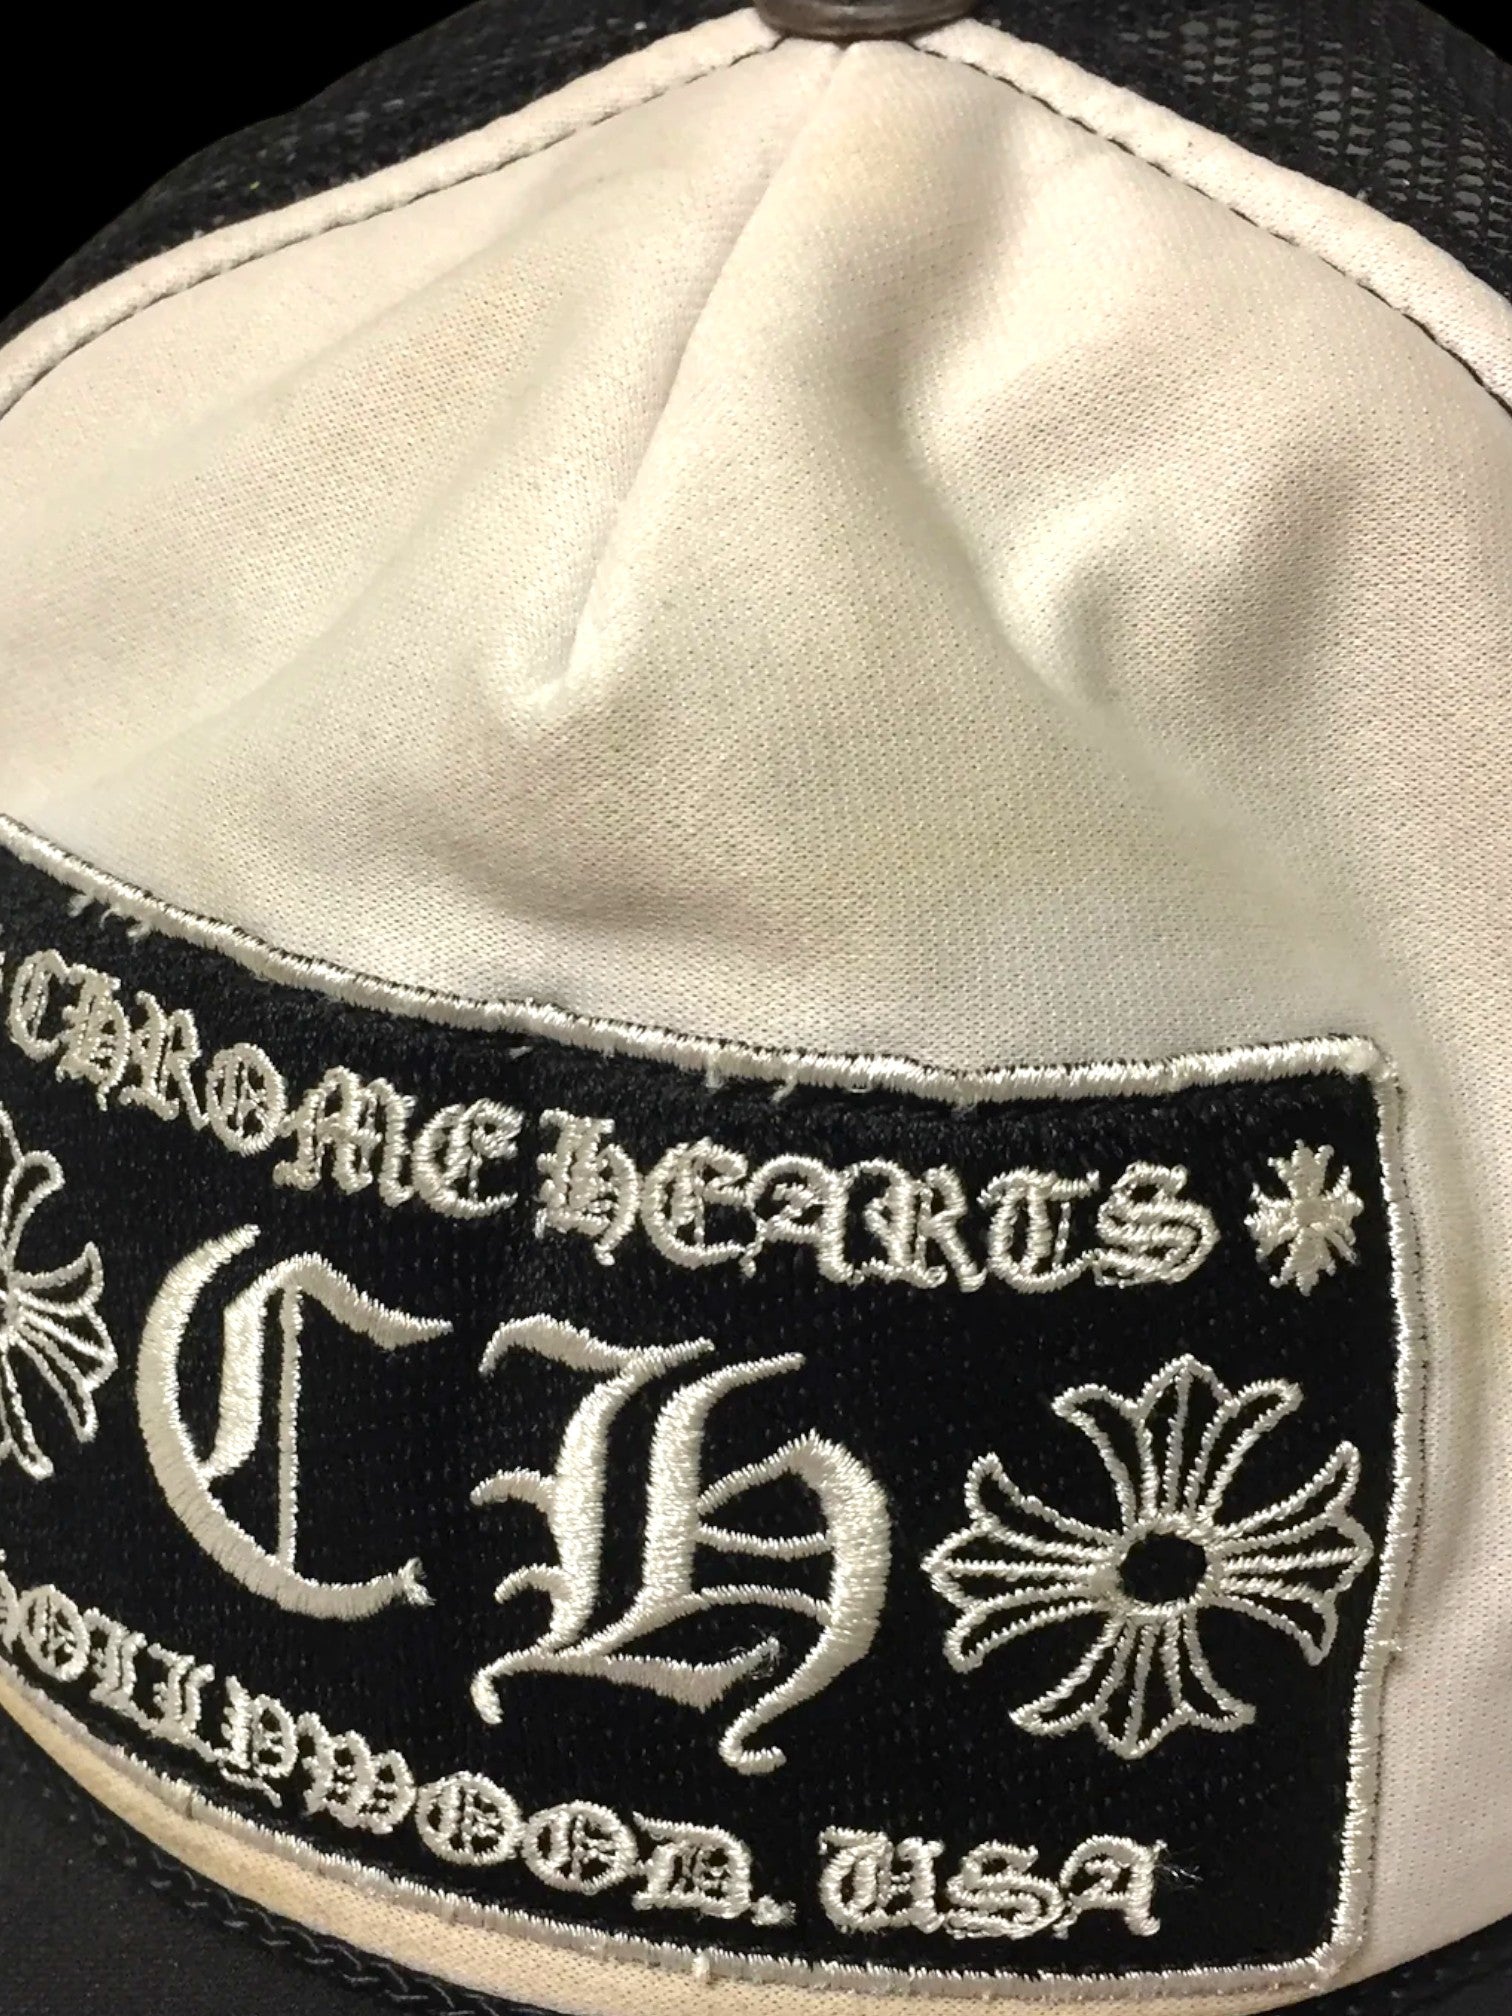 Chrome Hearts CH Hollywood Black White Trucker Hat